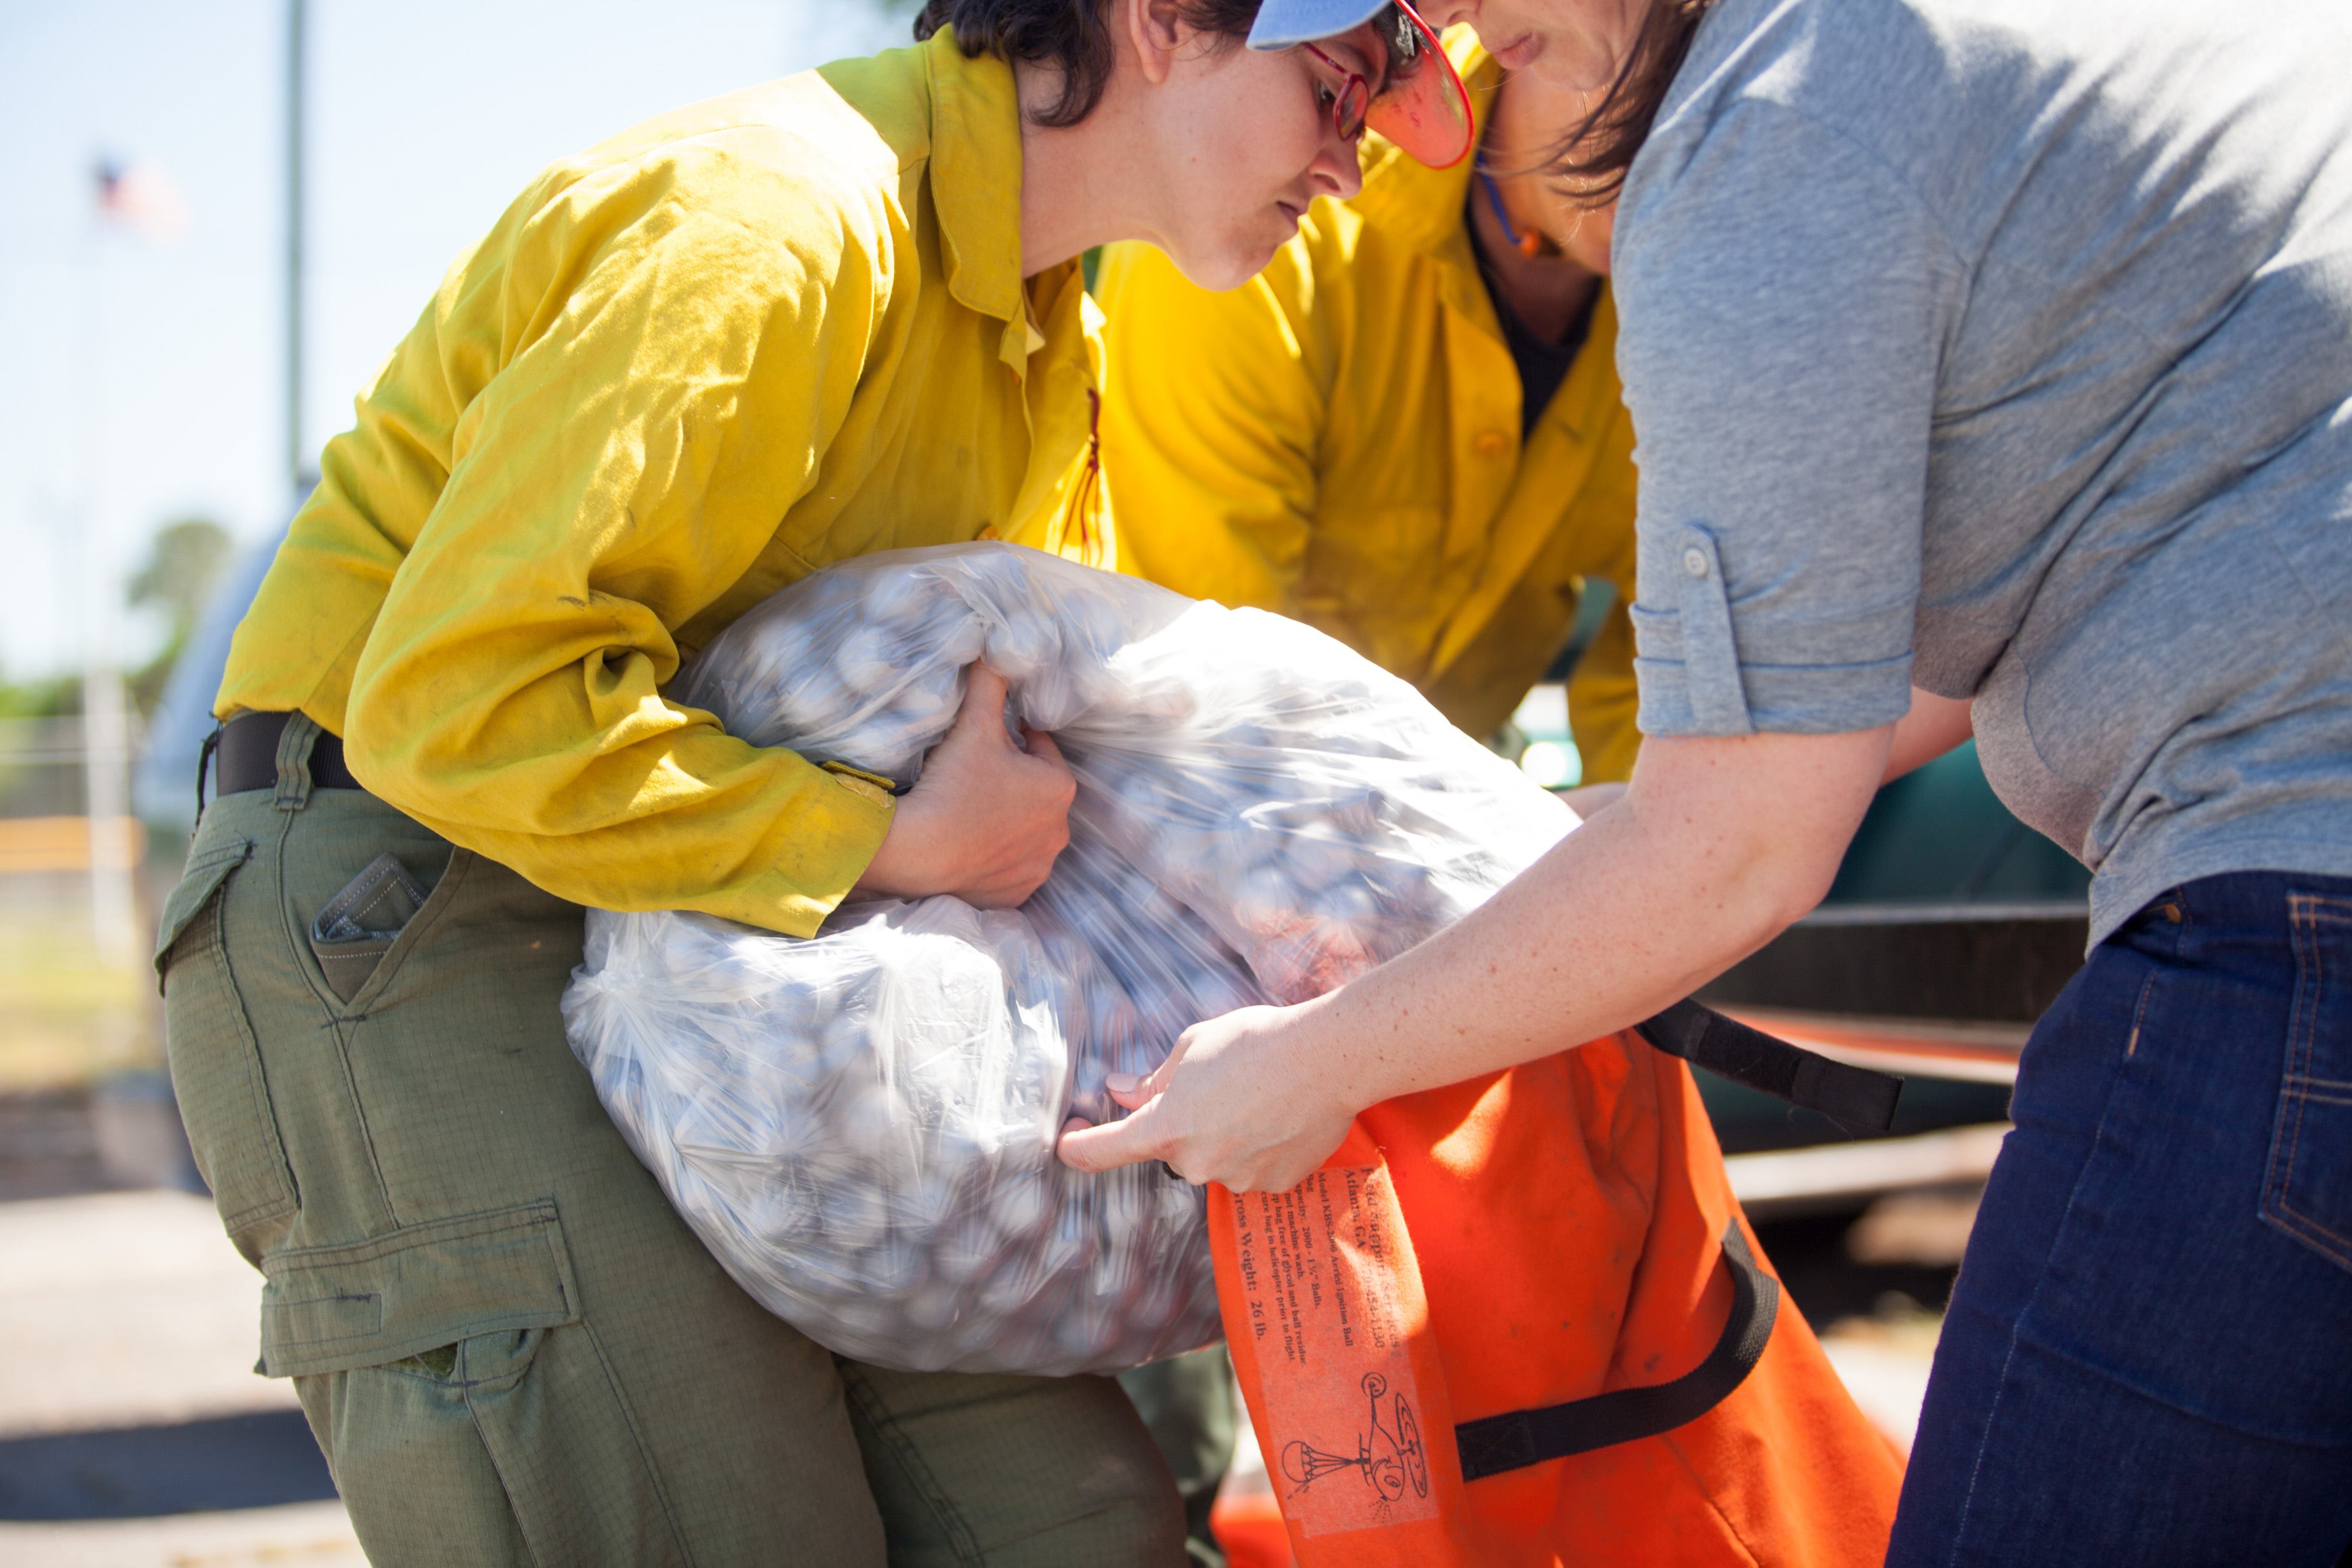 Three people huddle around an orange sack. One person holds the sack open while a second empties a clear plastic bag full of gray spheres into the sack.